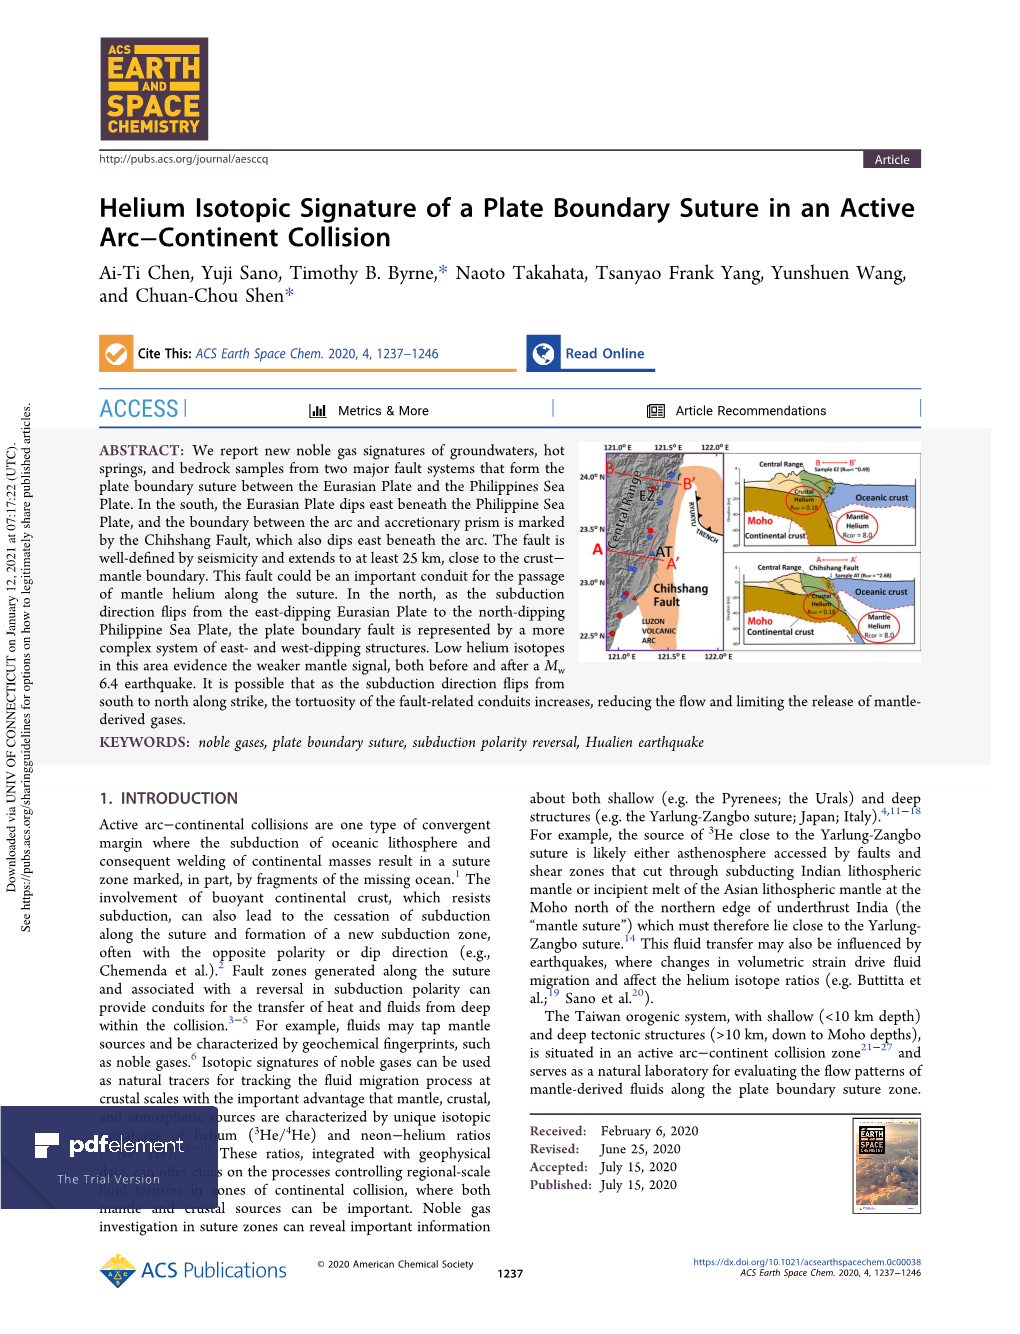 Helium Isotopic Signature of a Plate Boundary Suture in an Active Arc–Continent Collision